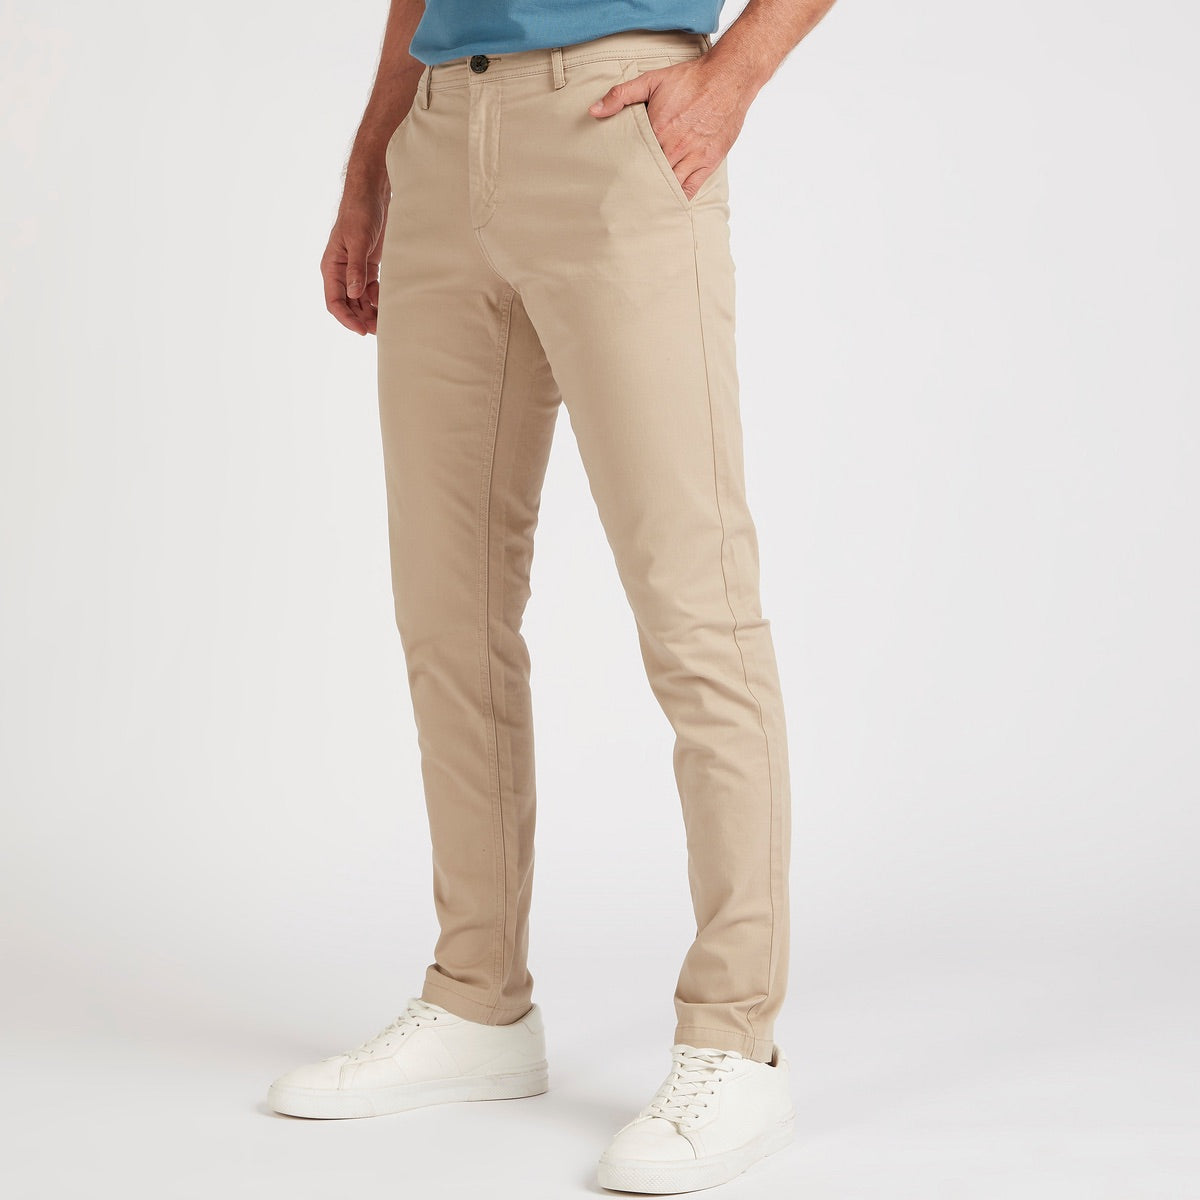 Beige Regular Fit Chinos with Button Closure and Pockets